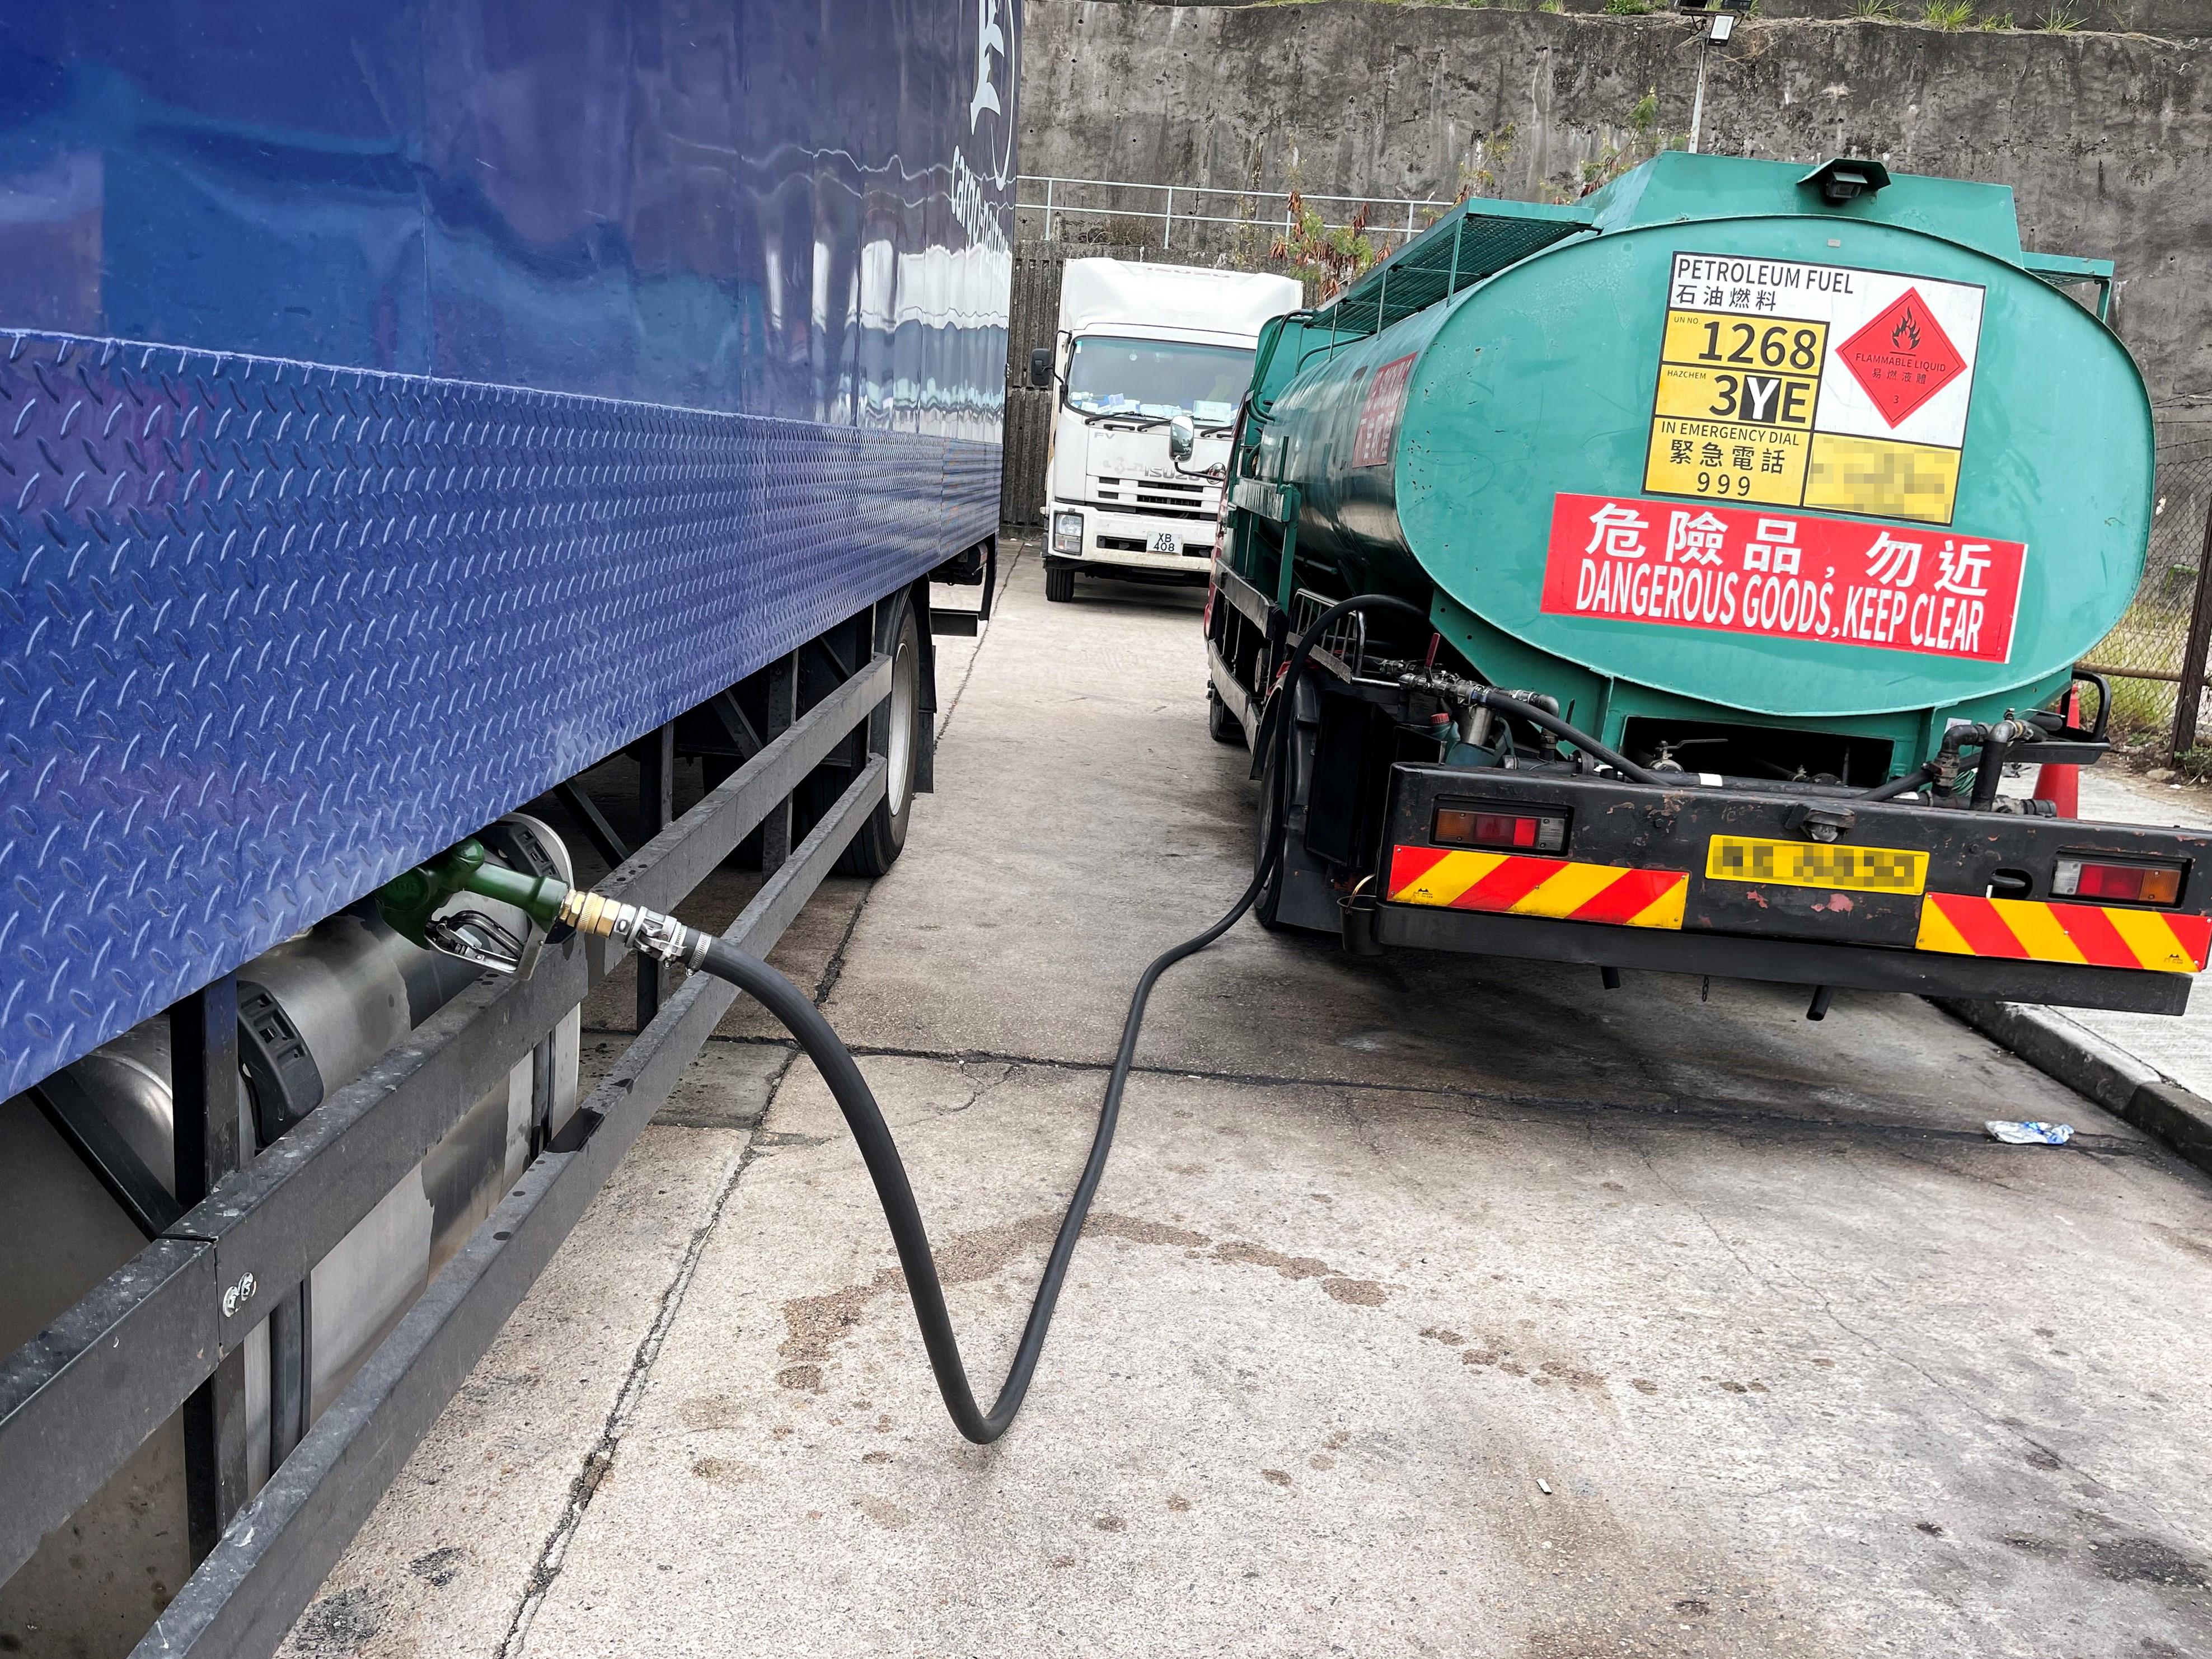 The Fire Services Department, the Hong Kong Police Force and Hong Kong Customs mounted a territory-wide joint operation codenamed "Strong Thunder" to combat illicit fuelling activities today (April 20). Photo shows an oil tank wagon (right) suspected to be involved in illicit fuelling activities.